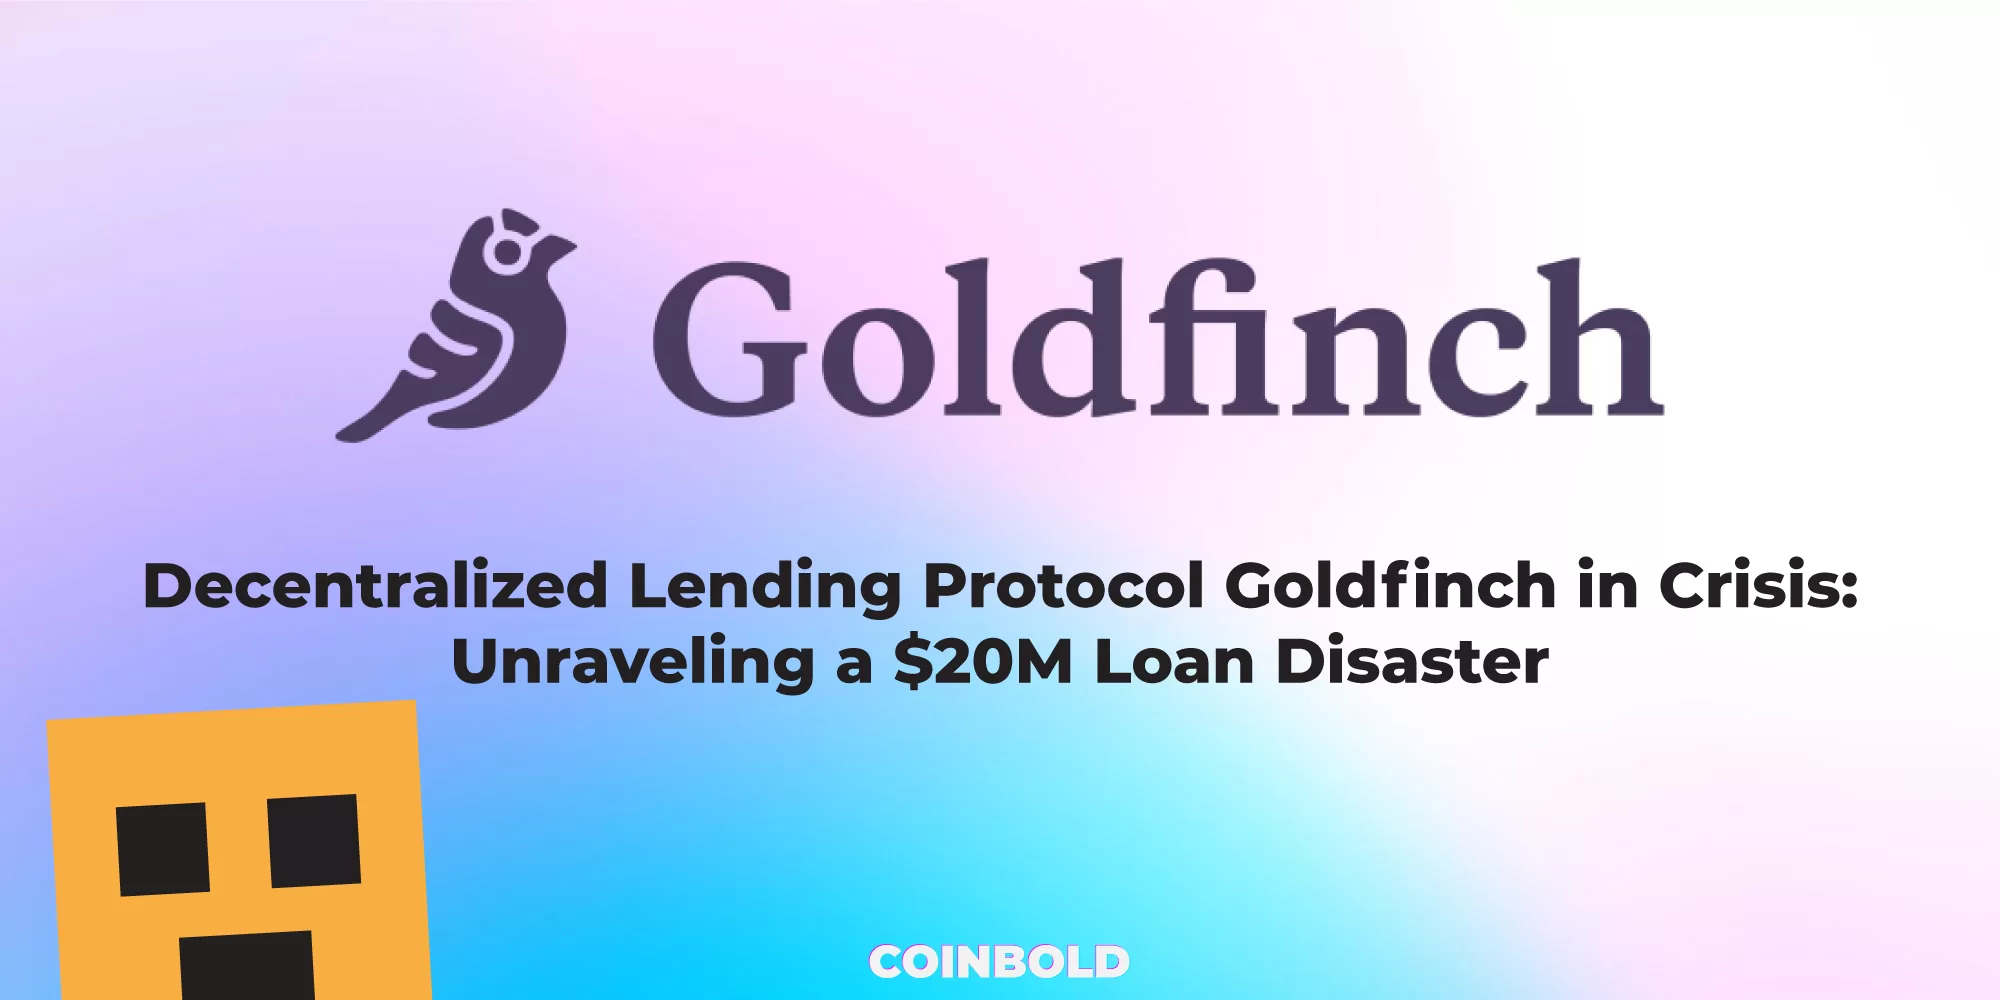 Decentralized Lending Protocol Goldfinch in Crisis Unraveling a $20M Loan Disaster